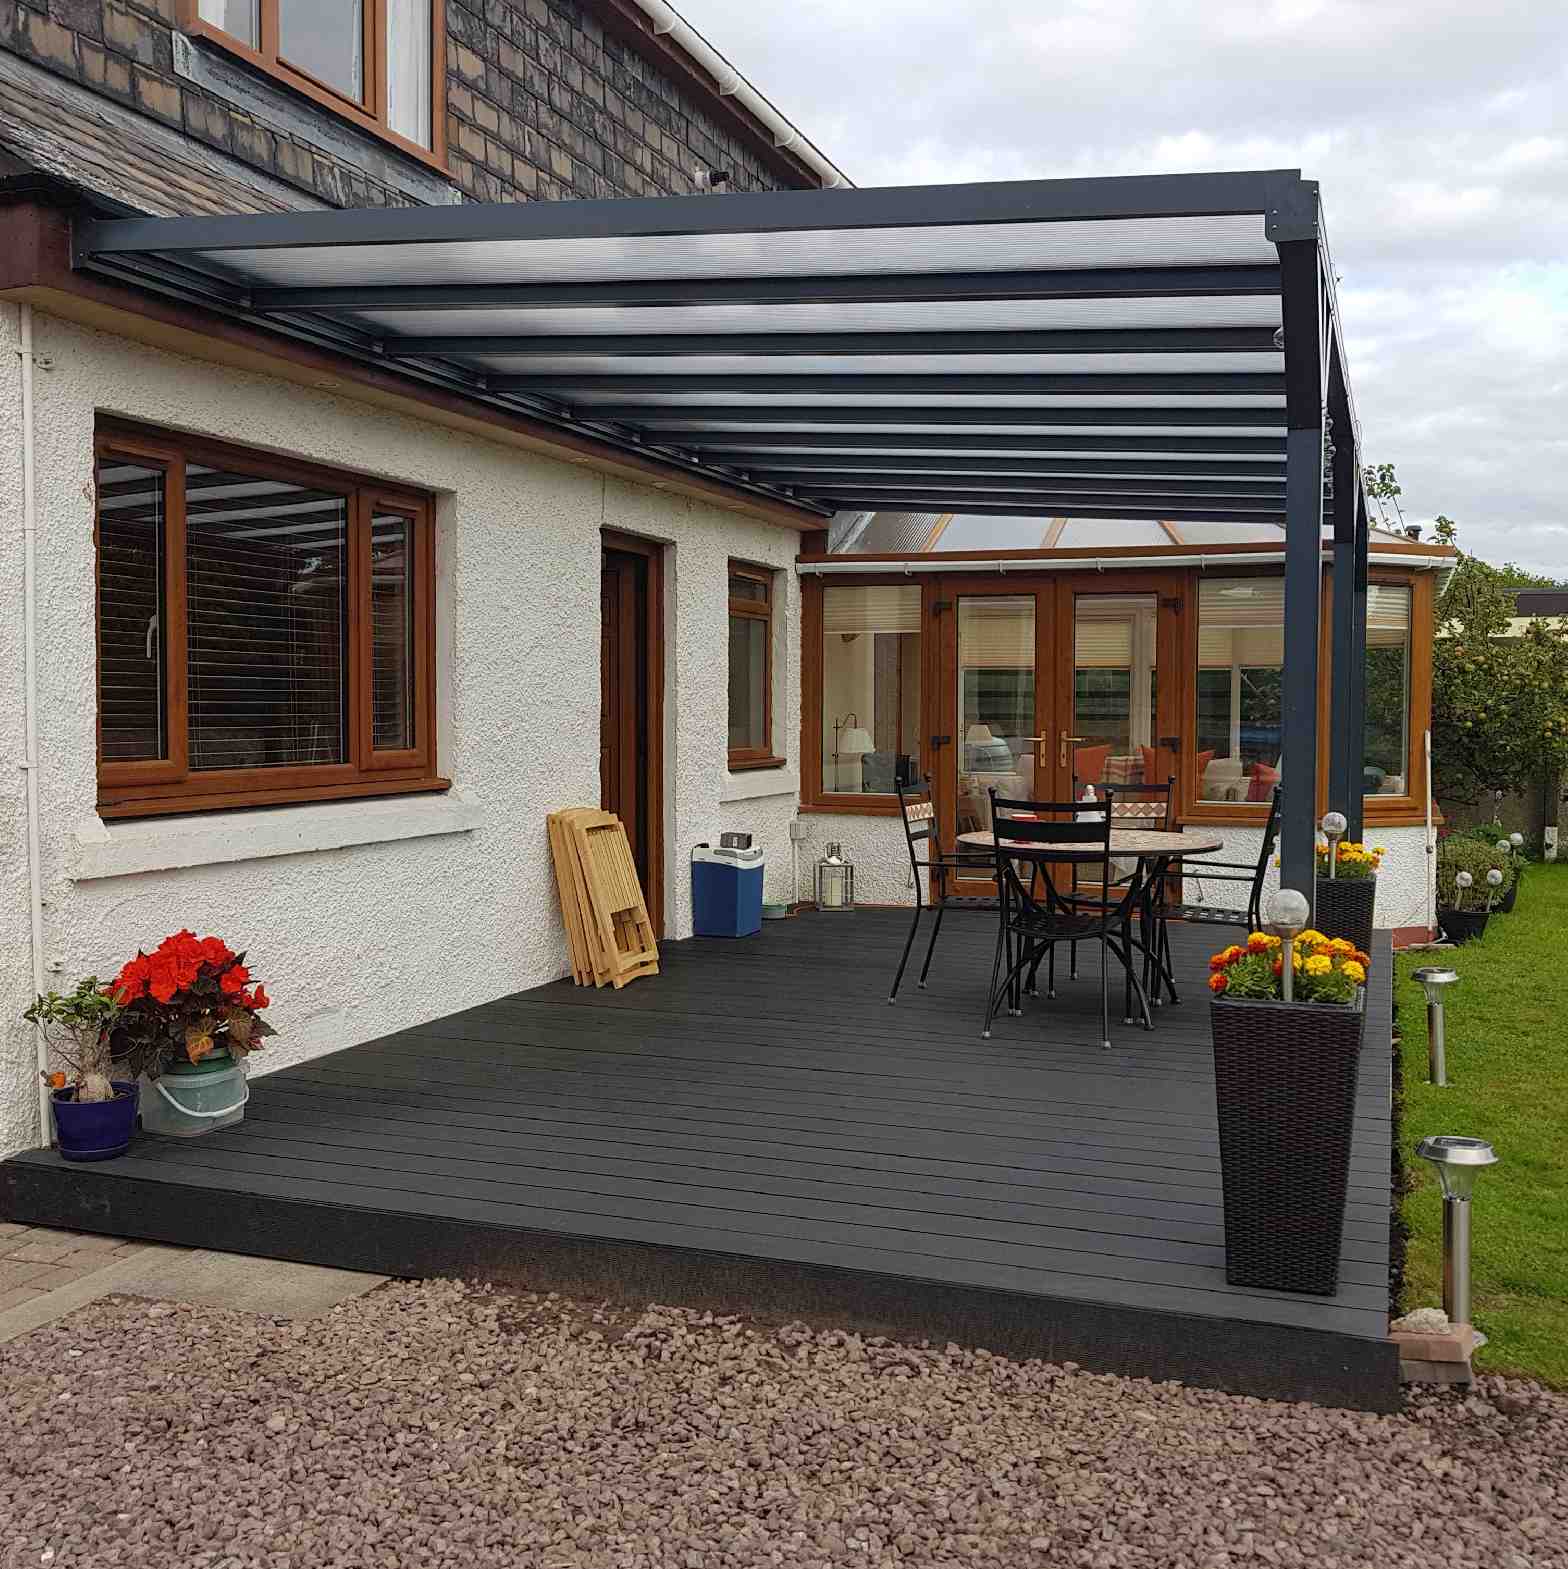 Buy Omega Verandah, Anthracite Grey, 16mm Polycarbonate Glazing - 10.6m (W) x 4.0m (P), (5) Supporting Posts online today